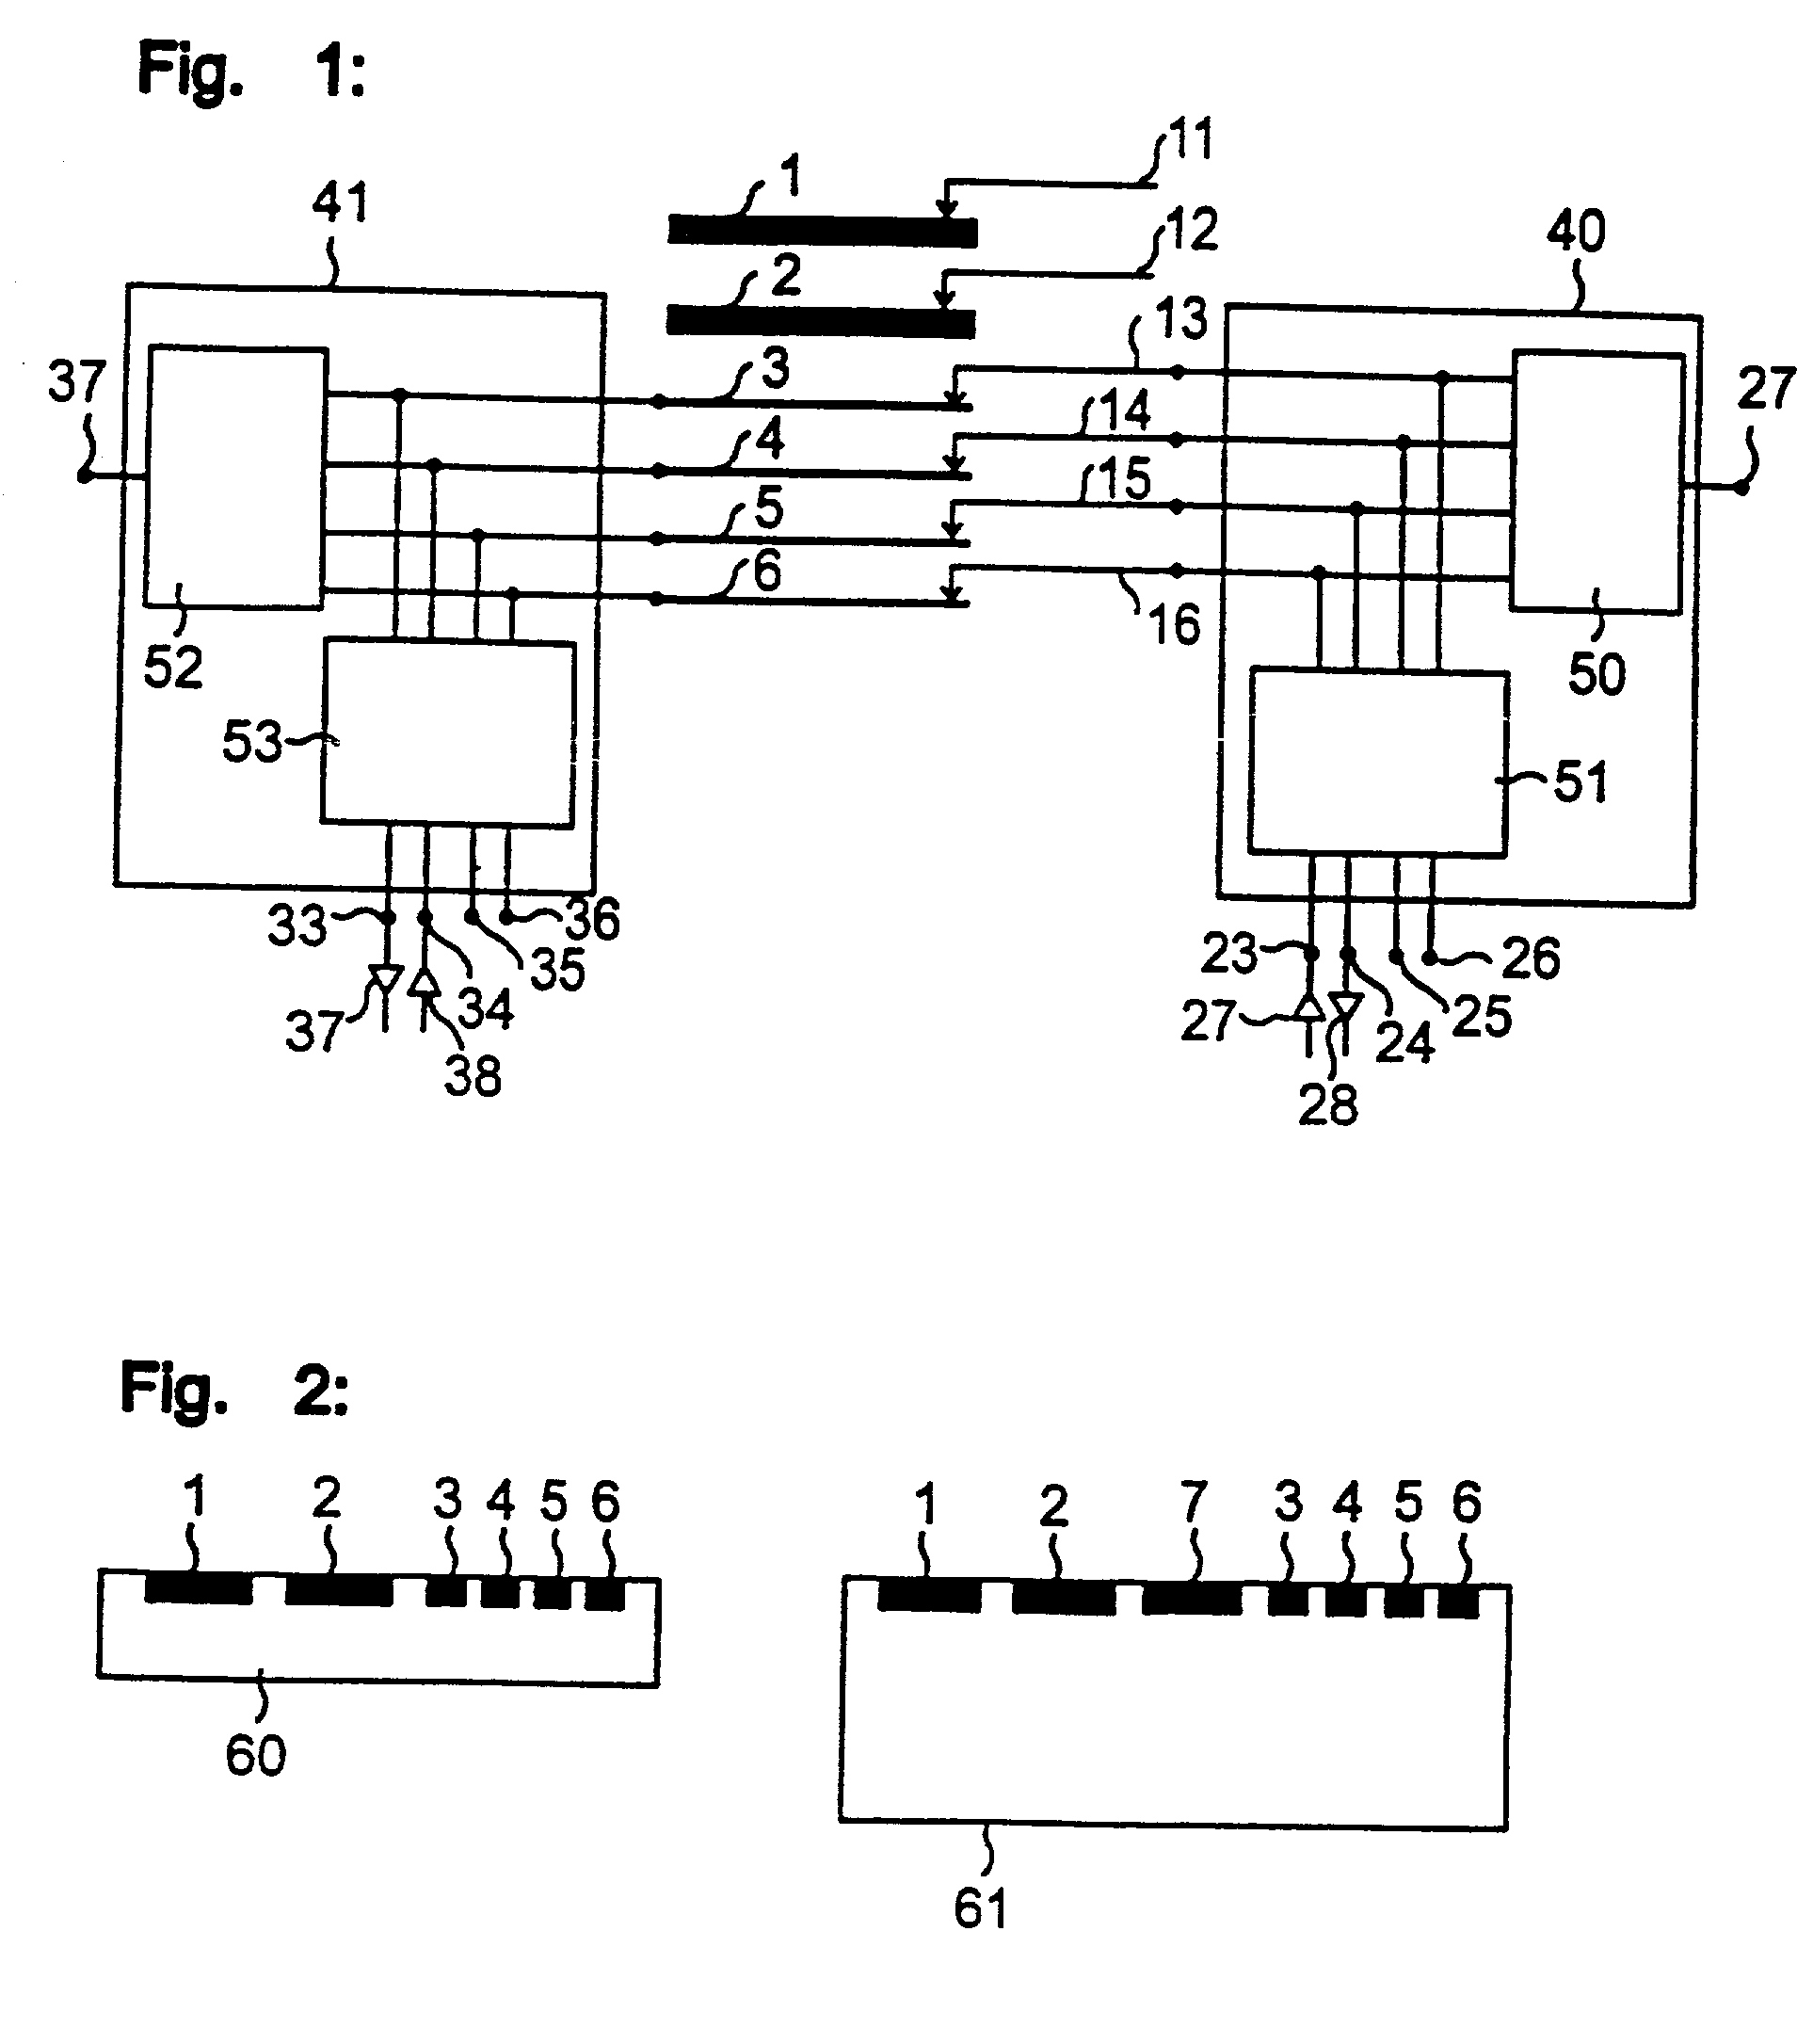 Array for the transmission of electrical signals between moving units at a reduced number of paths